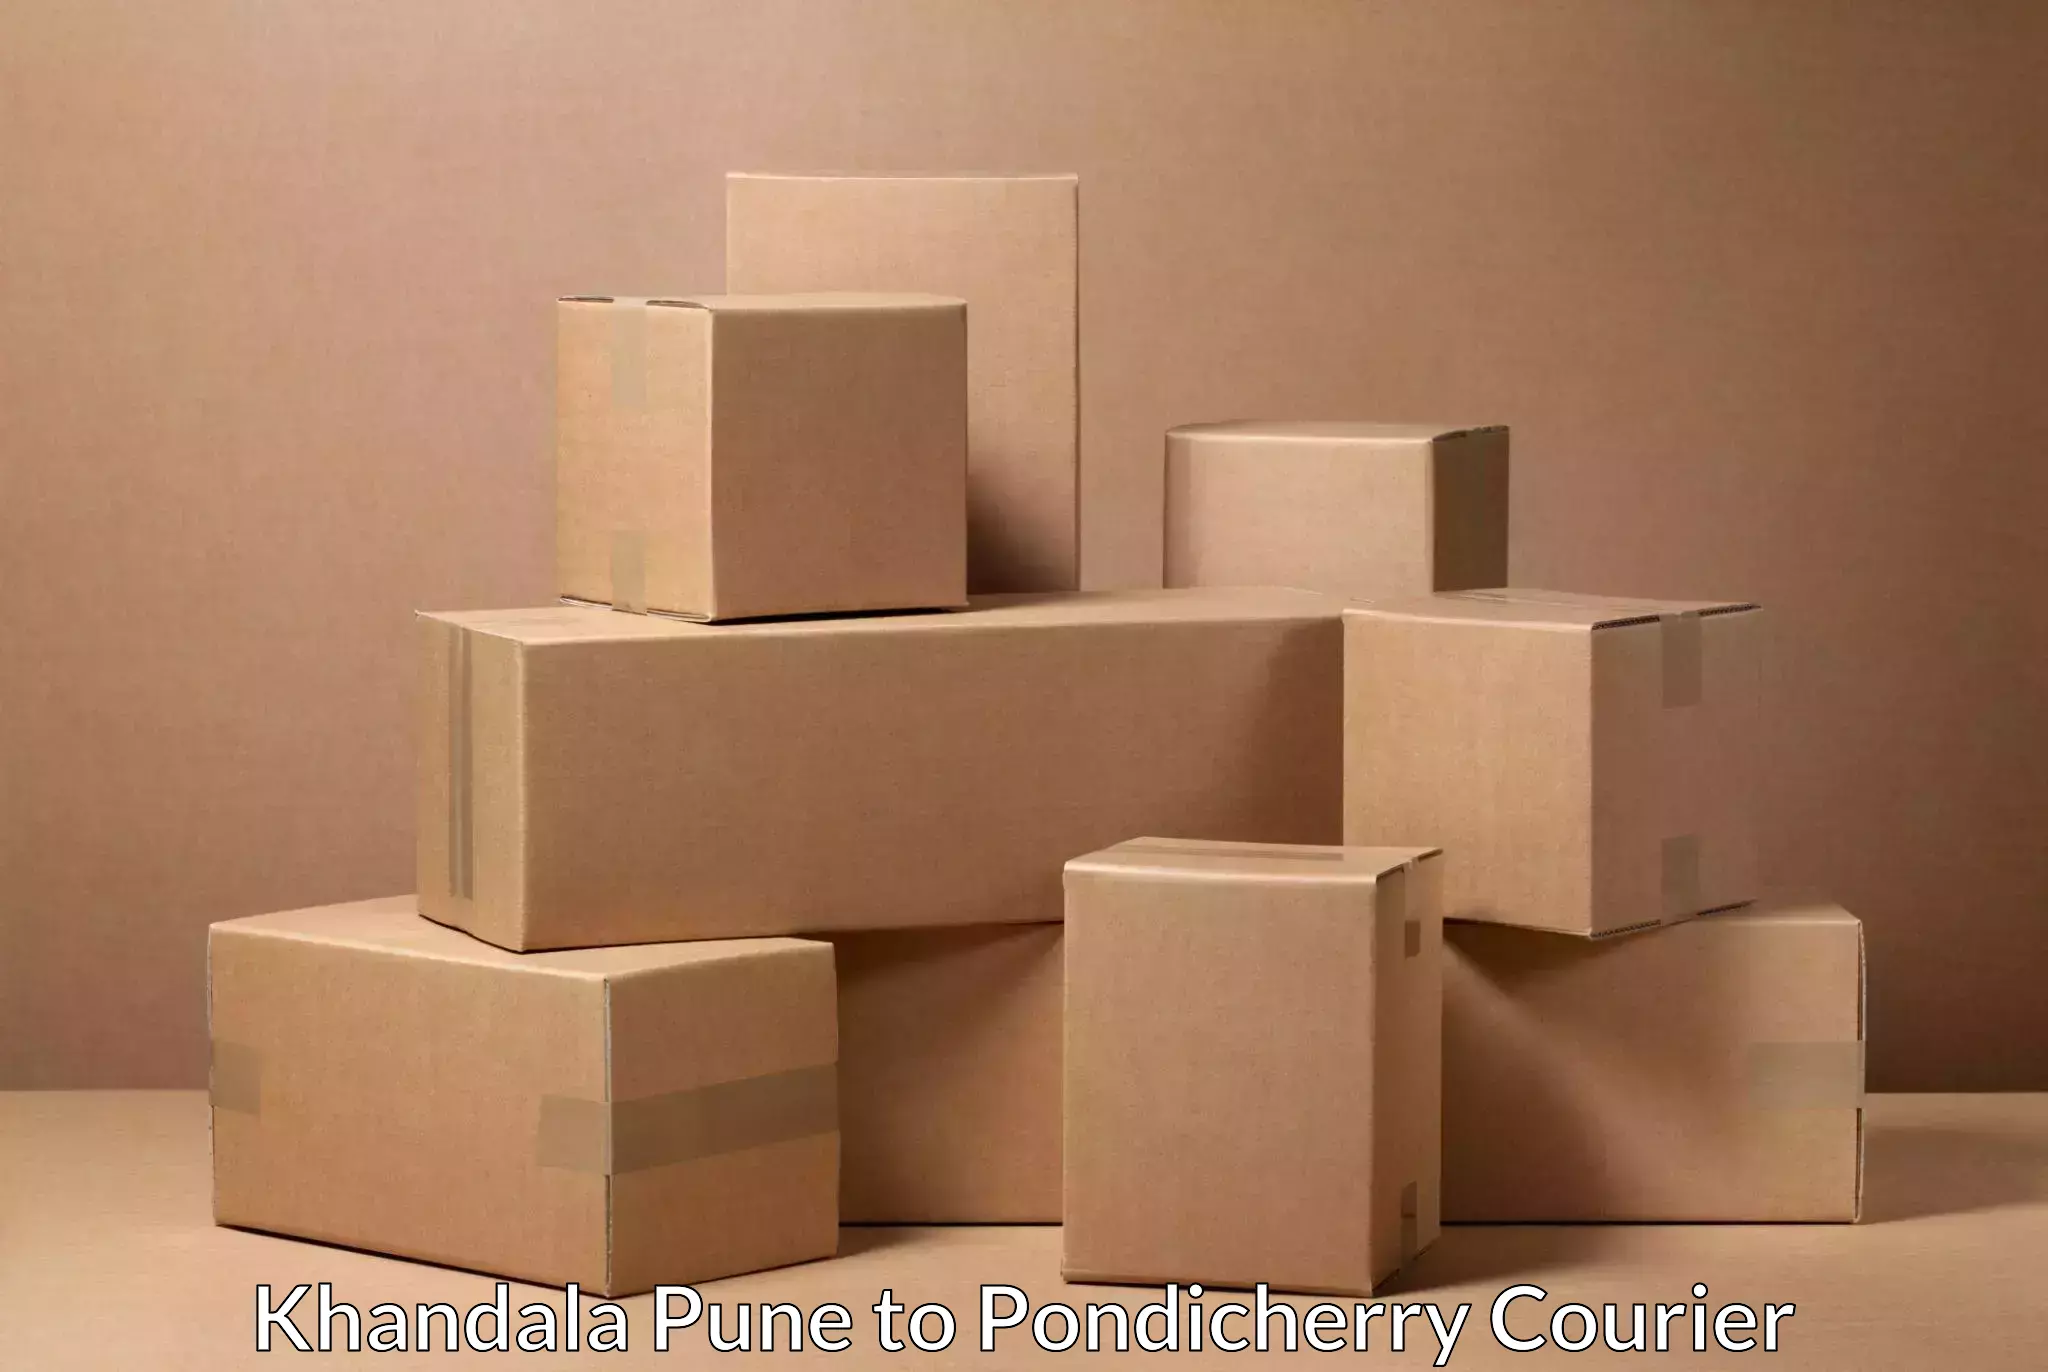 Package delivery network Khandala Pune to Pondicherry